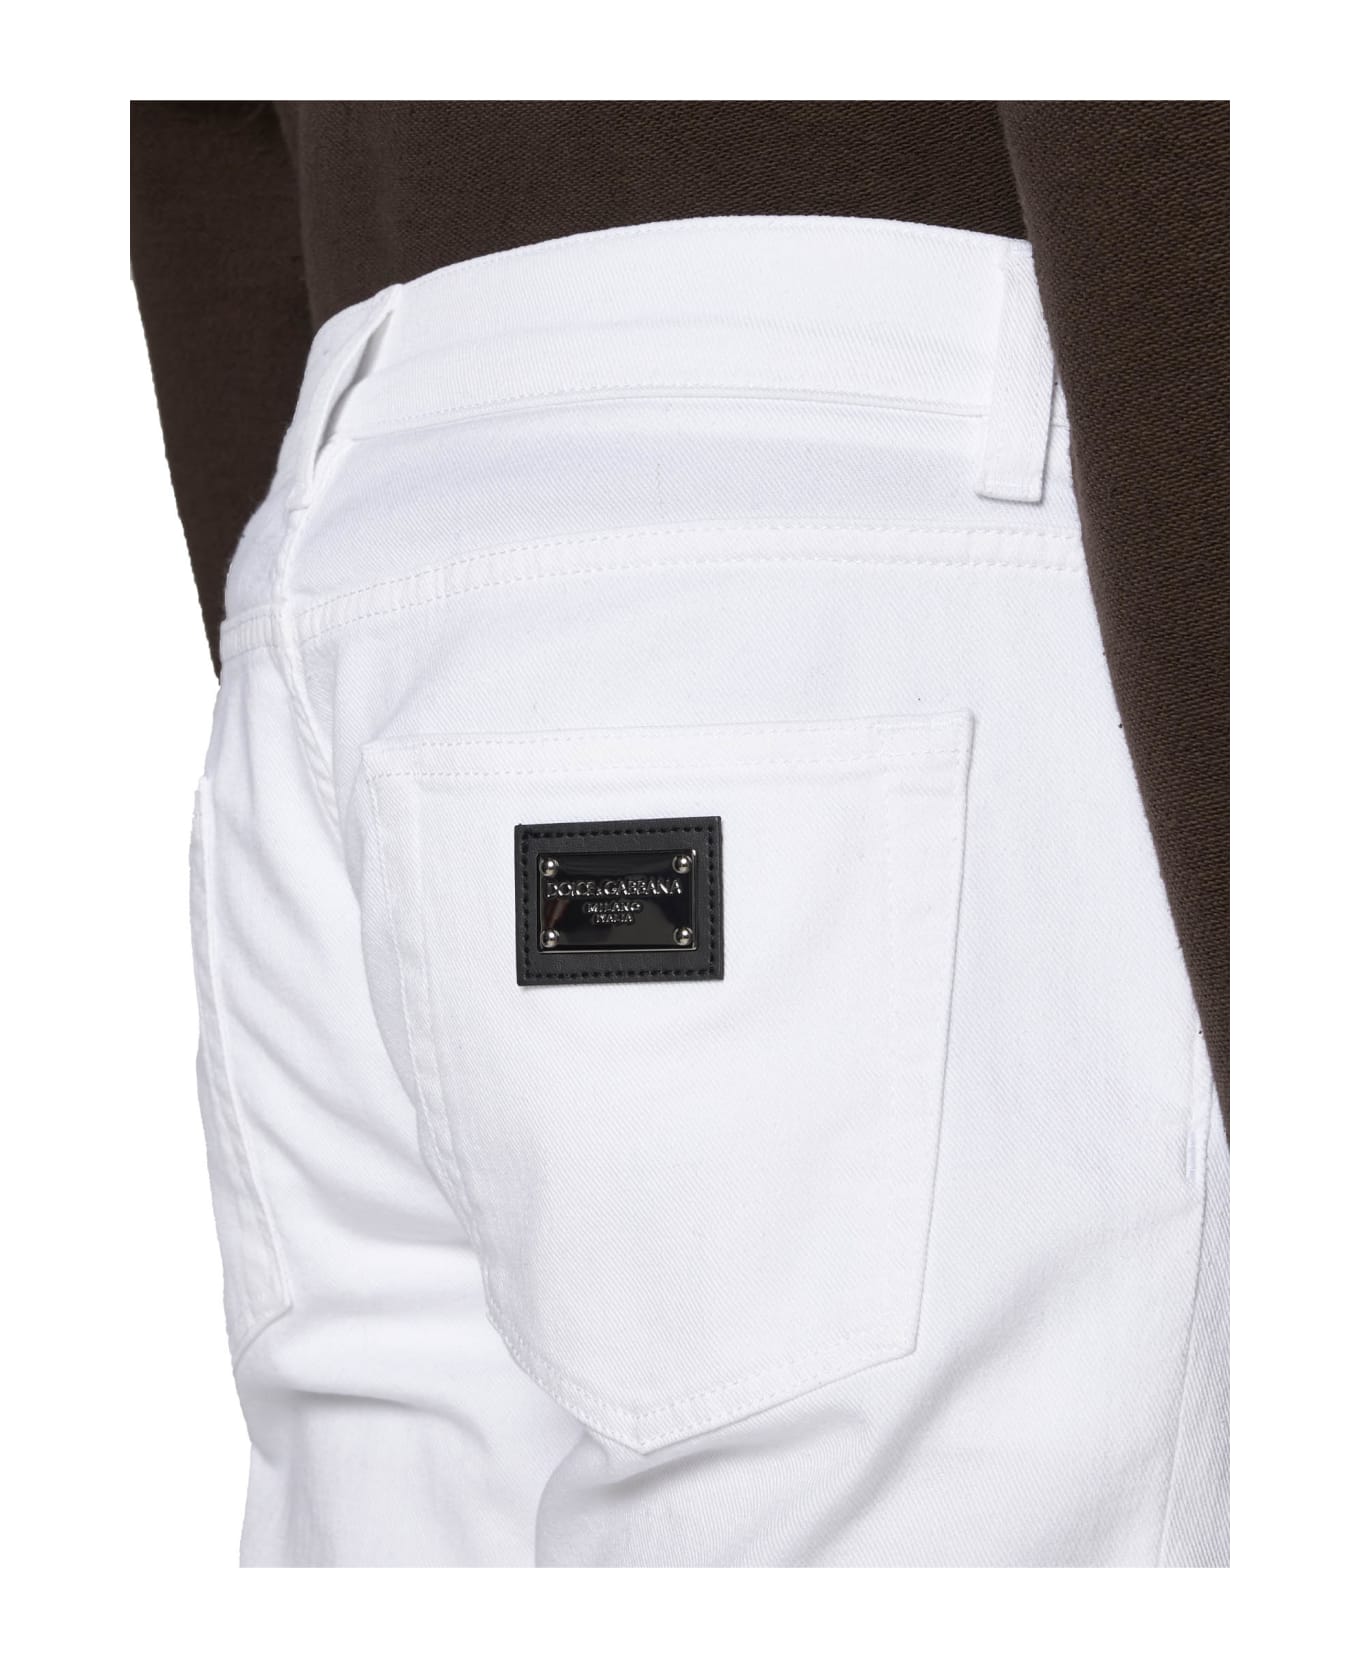 Dolce & Gabbana Slim-fit Jeans With Logo Plaque - White